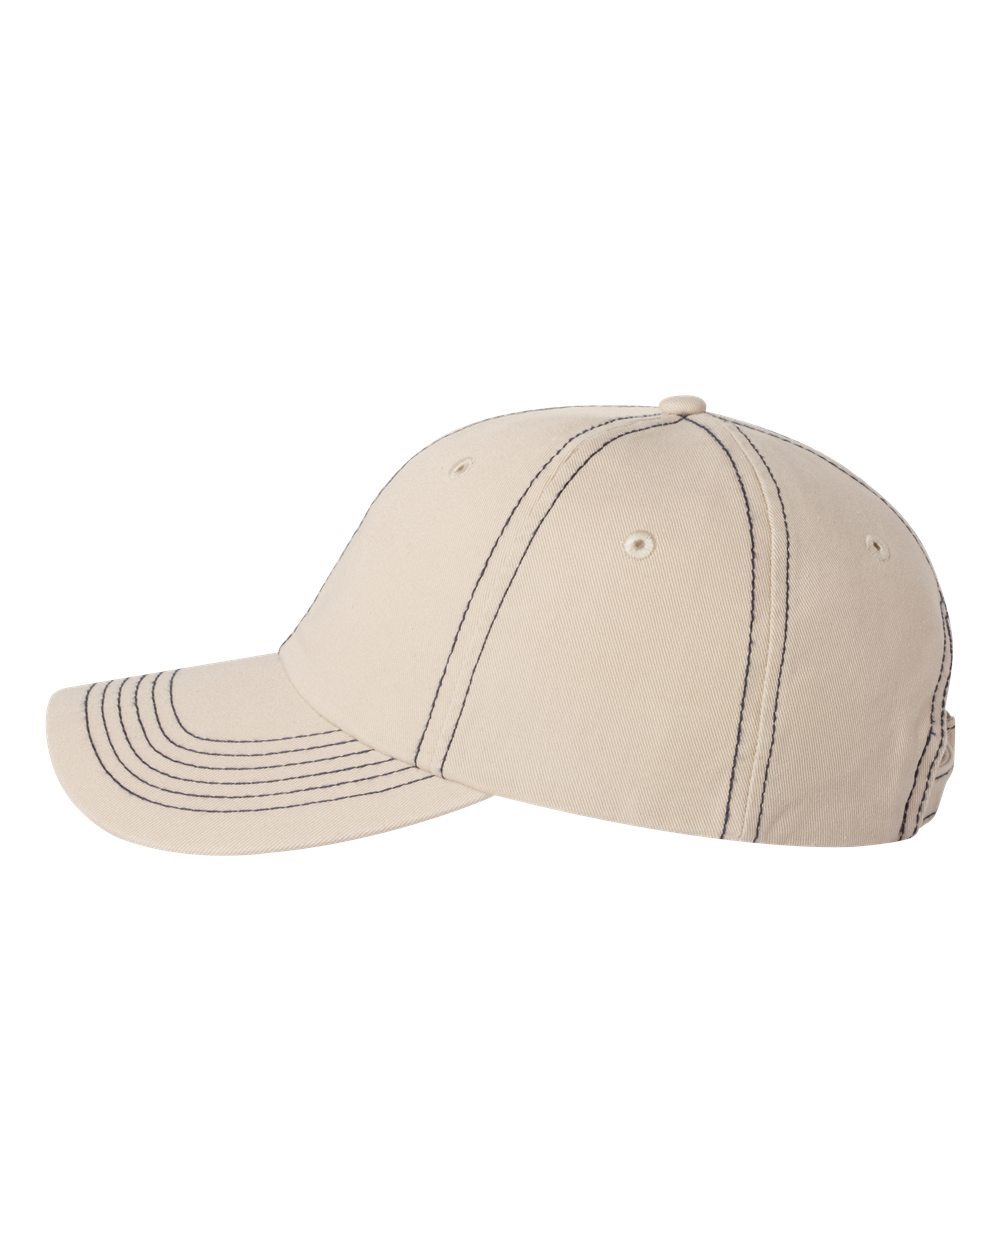 Valucap VC300A Adult Bio-Washed Unstructured Cap $3.50 - Gifts 10 and Under